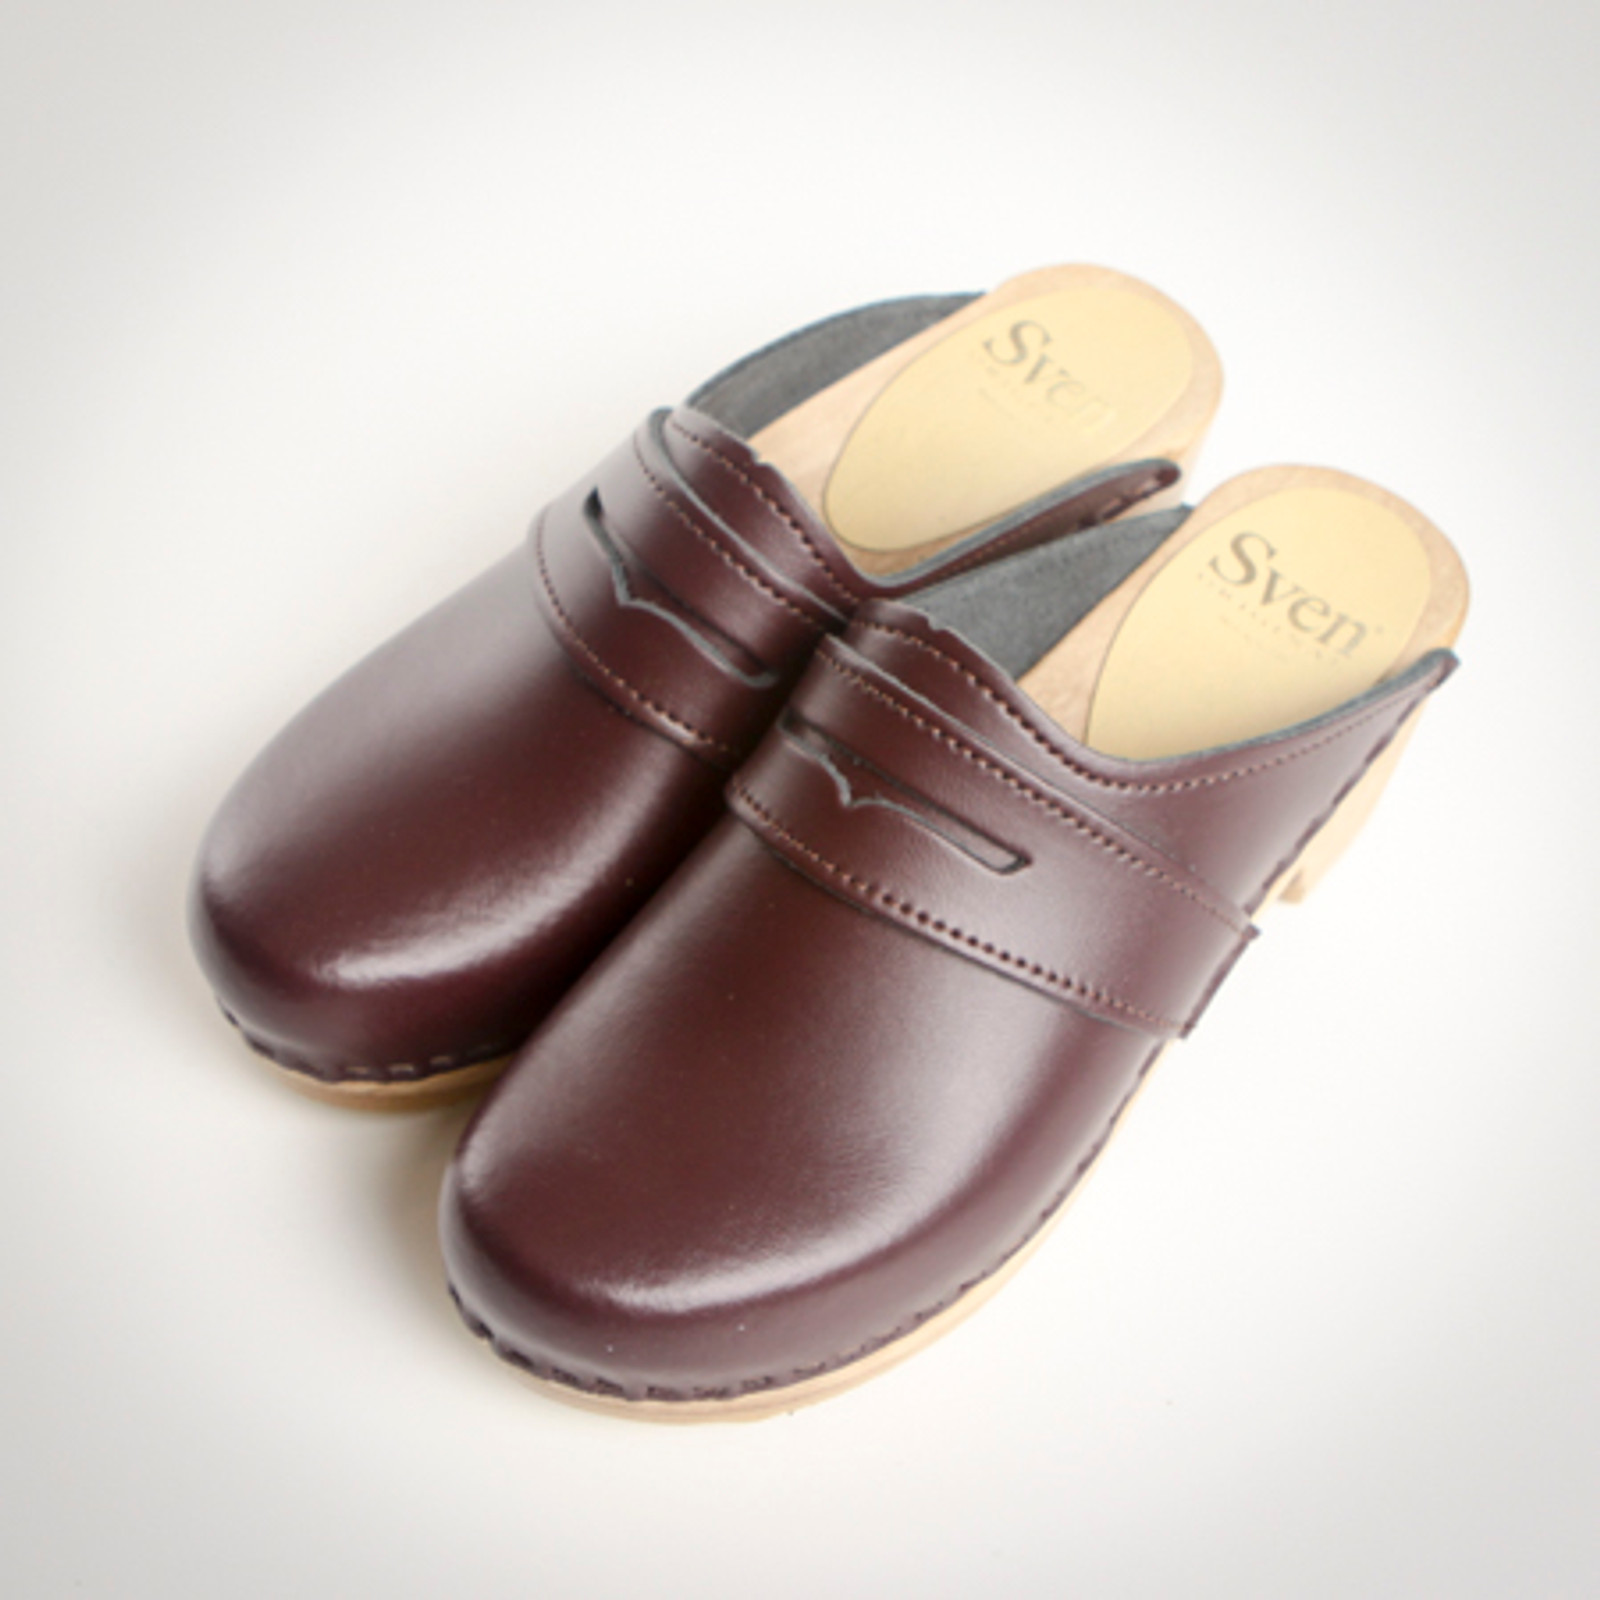 Penny Loafer Clogs - Mid Heels